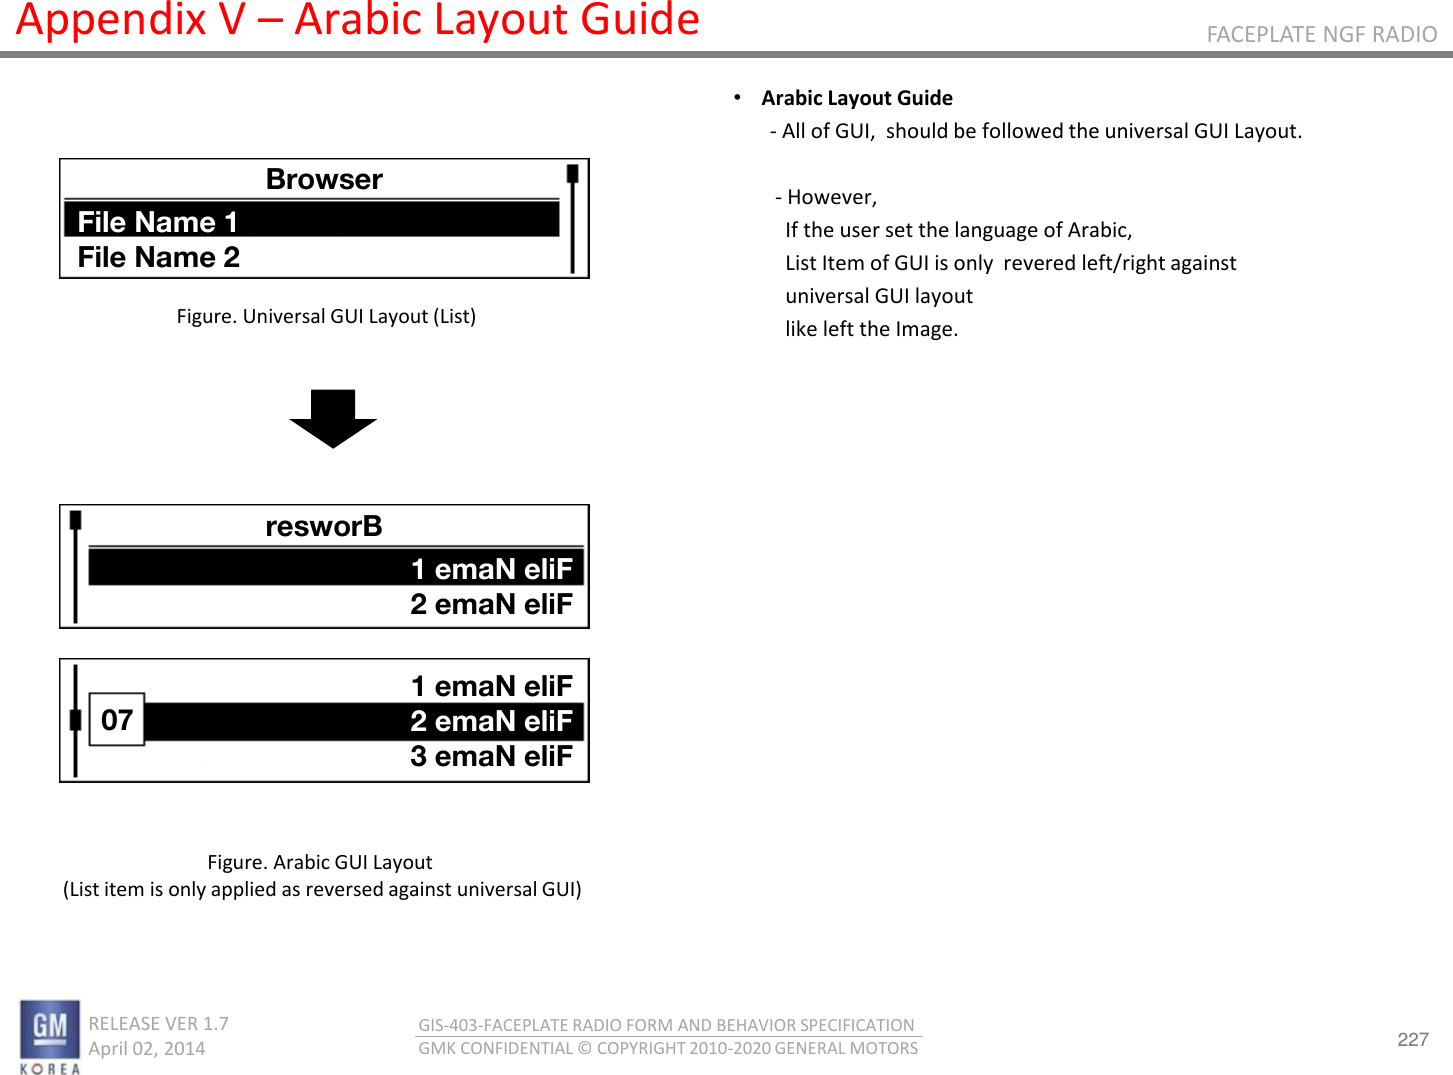 227 RELEASE VER 1.7                          April 02, 2014 GIS-403-FACEPLATE RADIO FORM AND BEHAVIOR SPECIFICATION GMK CONFIDENTIAL © COPYRIGHT 2010-2020 GENERAL MOTORS FACEPLATE NGF RADIO Appendix V – Arabic Layout Guide •Arabic Layout Guide        - All of GUI,  should be followed the universal GUI Layout.          - However,           If the user set the language of Arabic,           List Item of GUI is only  revered left/right against            universal GUI layout           like left the Image.   Figure. Universal GUI Layout (List) Figure. Arabic GUI Layout  (List item is only applied as reversed against universal GUI) Browser File Name 1 File Name 2 resworB 1 emaN eliF 2 emaN eliF 07 1 emaN eliF 2 emaN eliF 3 emaN eliF 